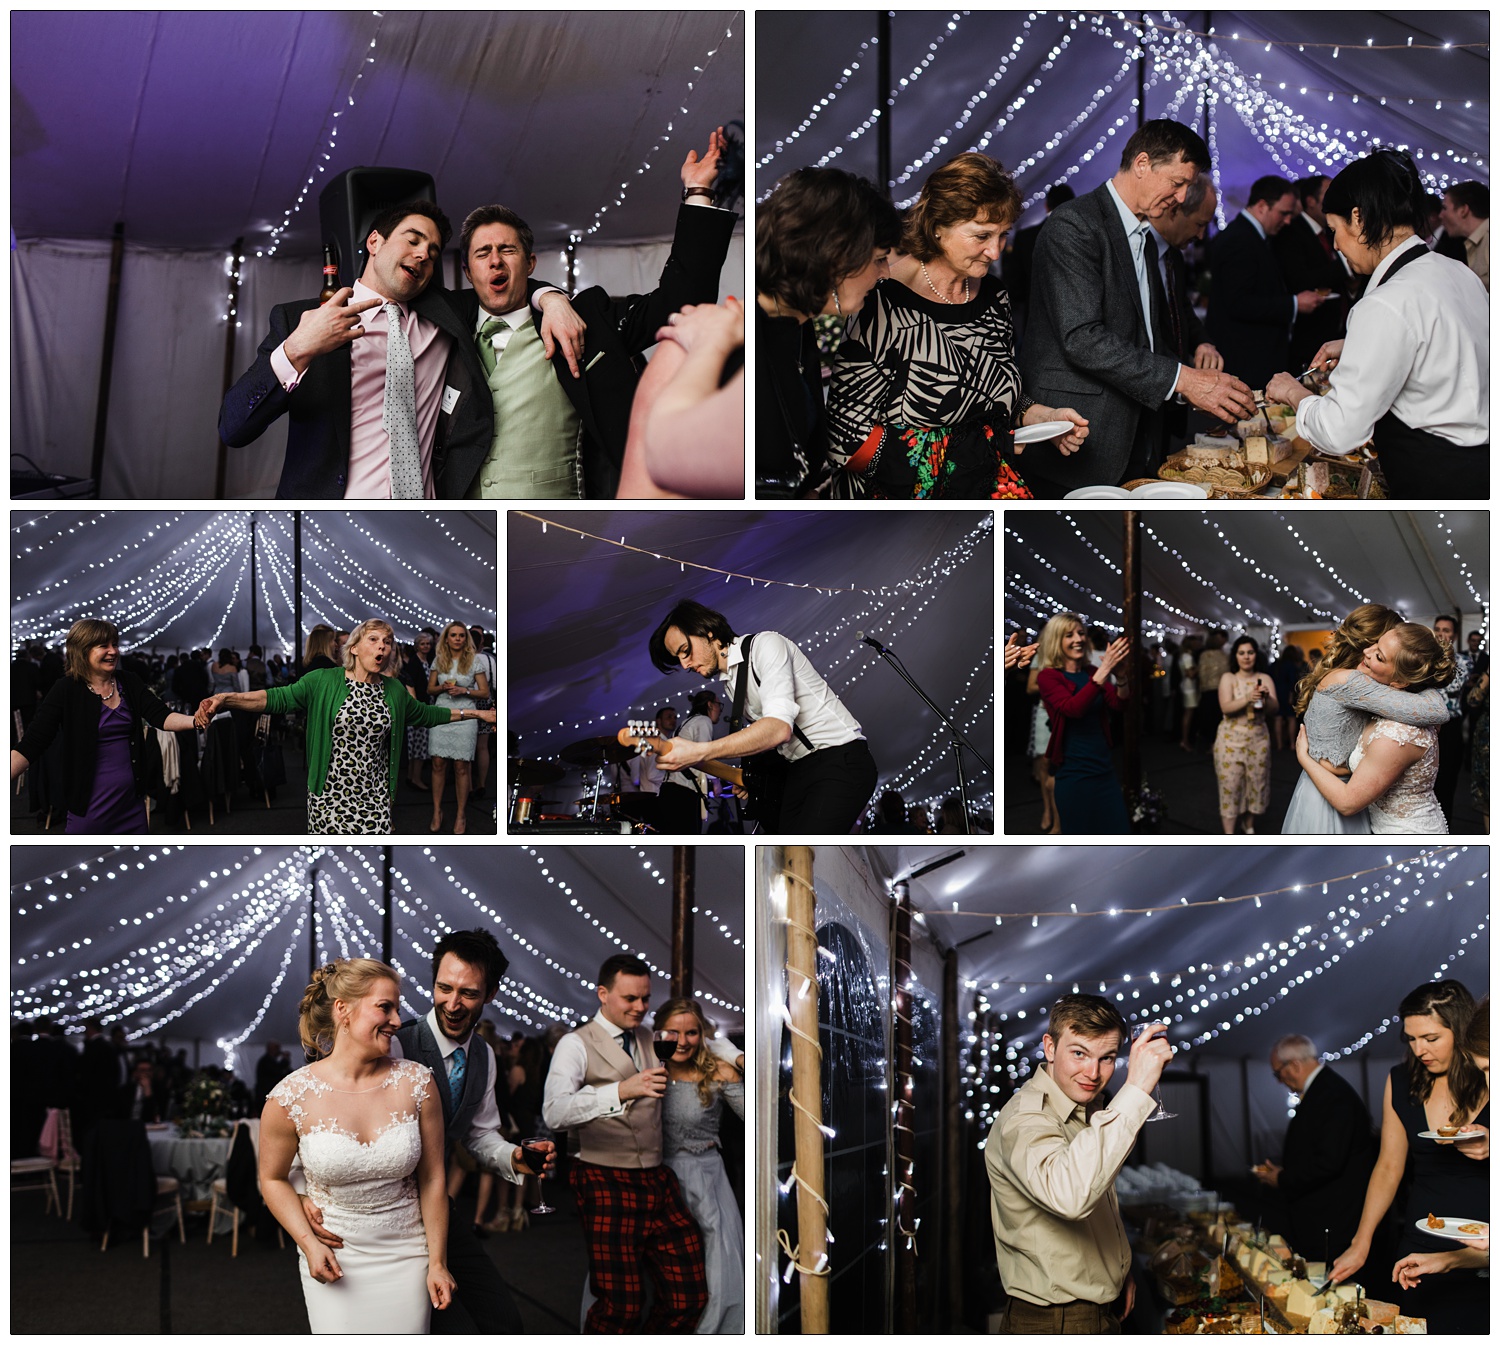 A marquee decorated in fairy lights and purple lights for a wedding reception. People dancing and being served cheese.